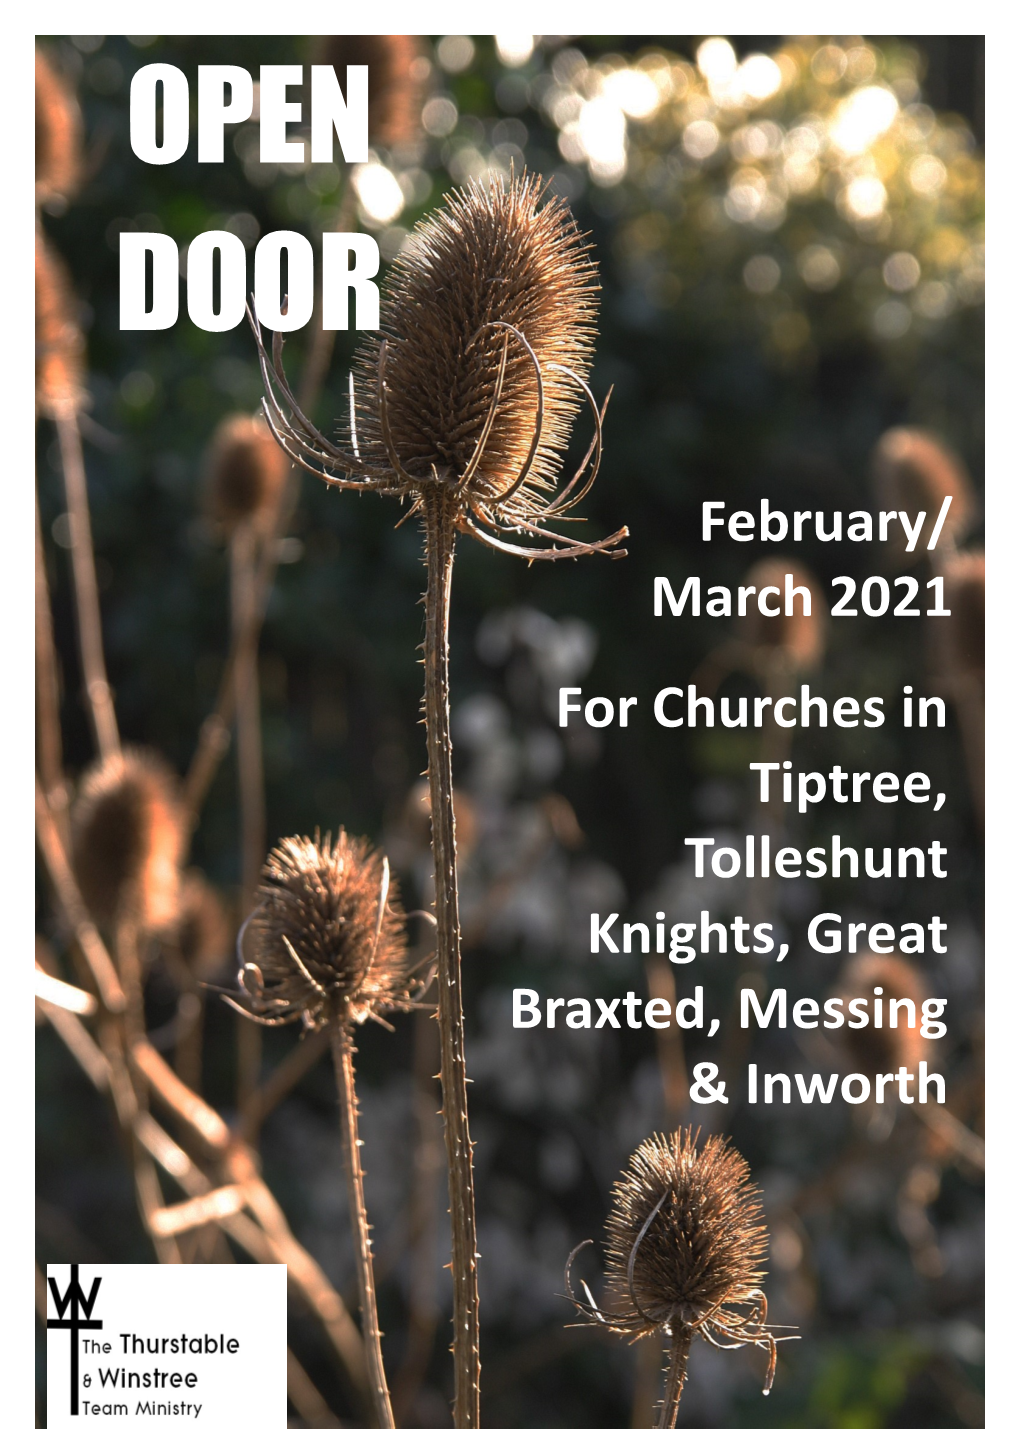 For Churches in Tiptree, Tolleshunt Knights, Great Braxted, Messing & Inworth